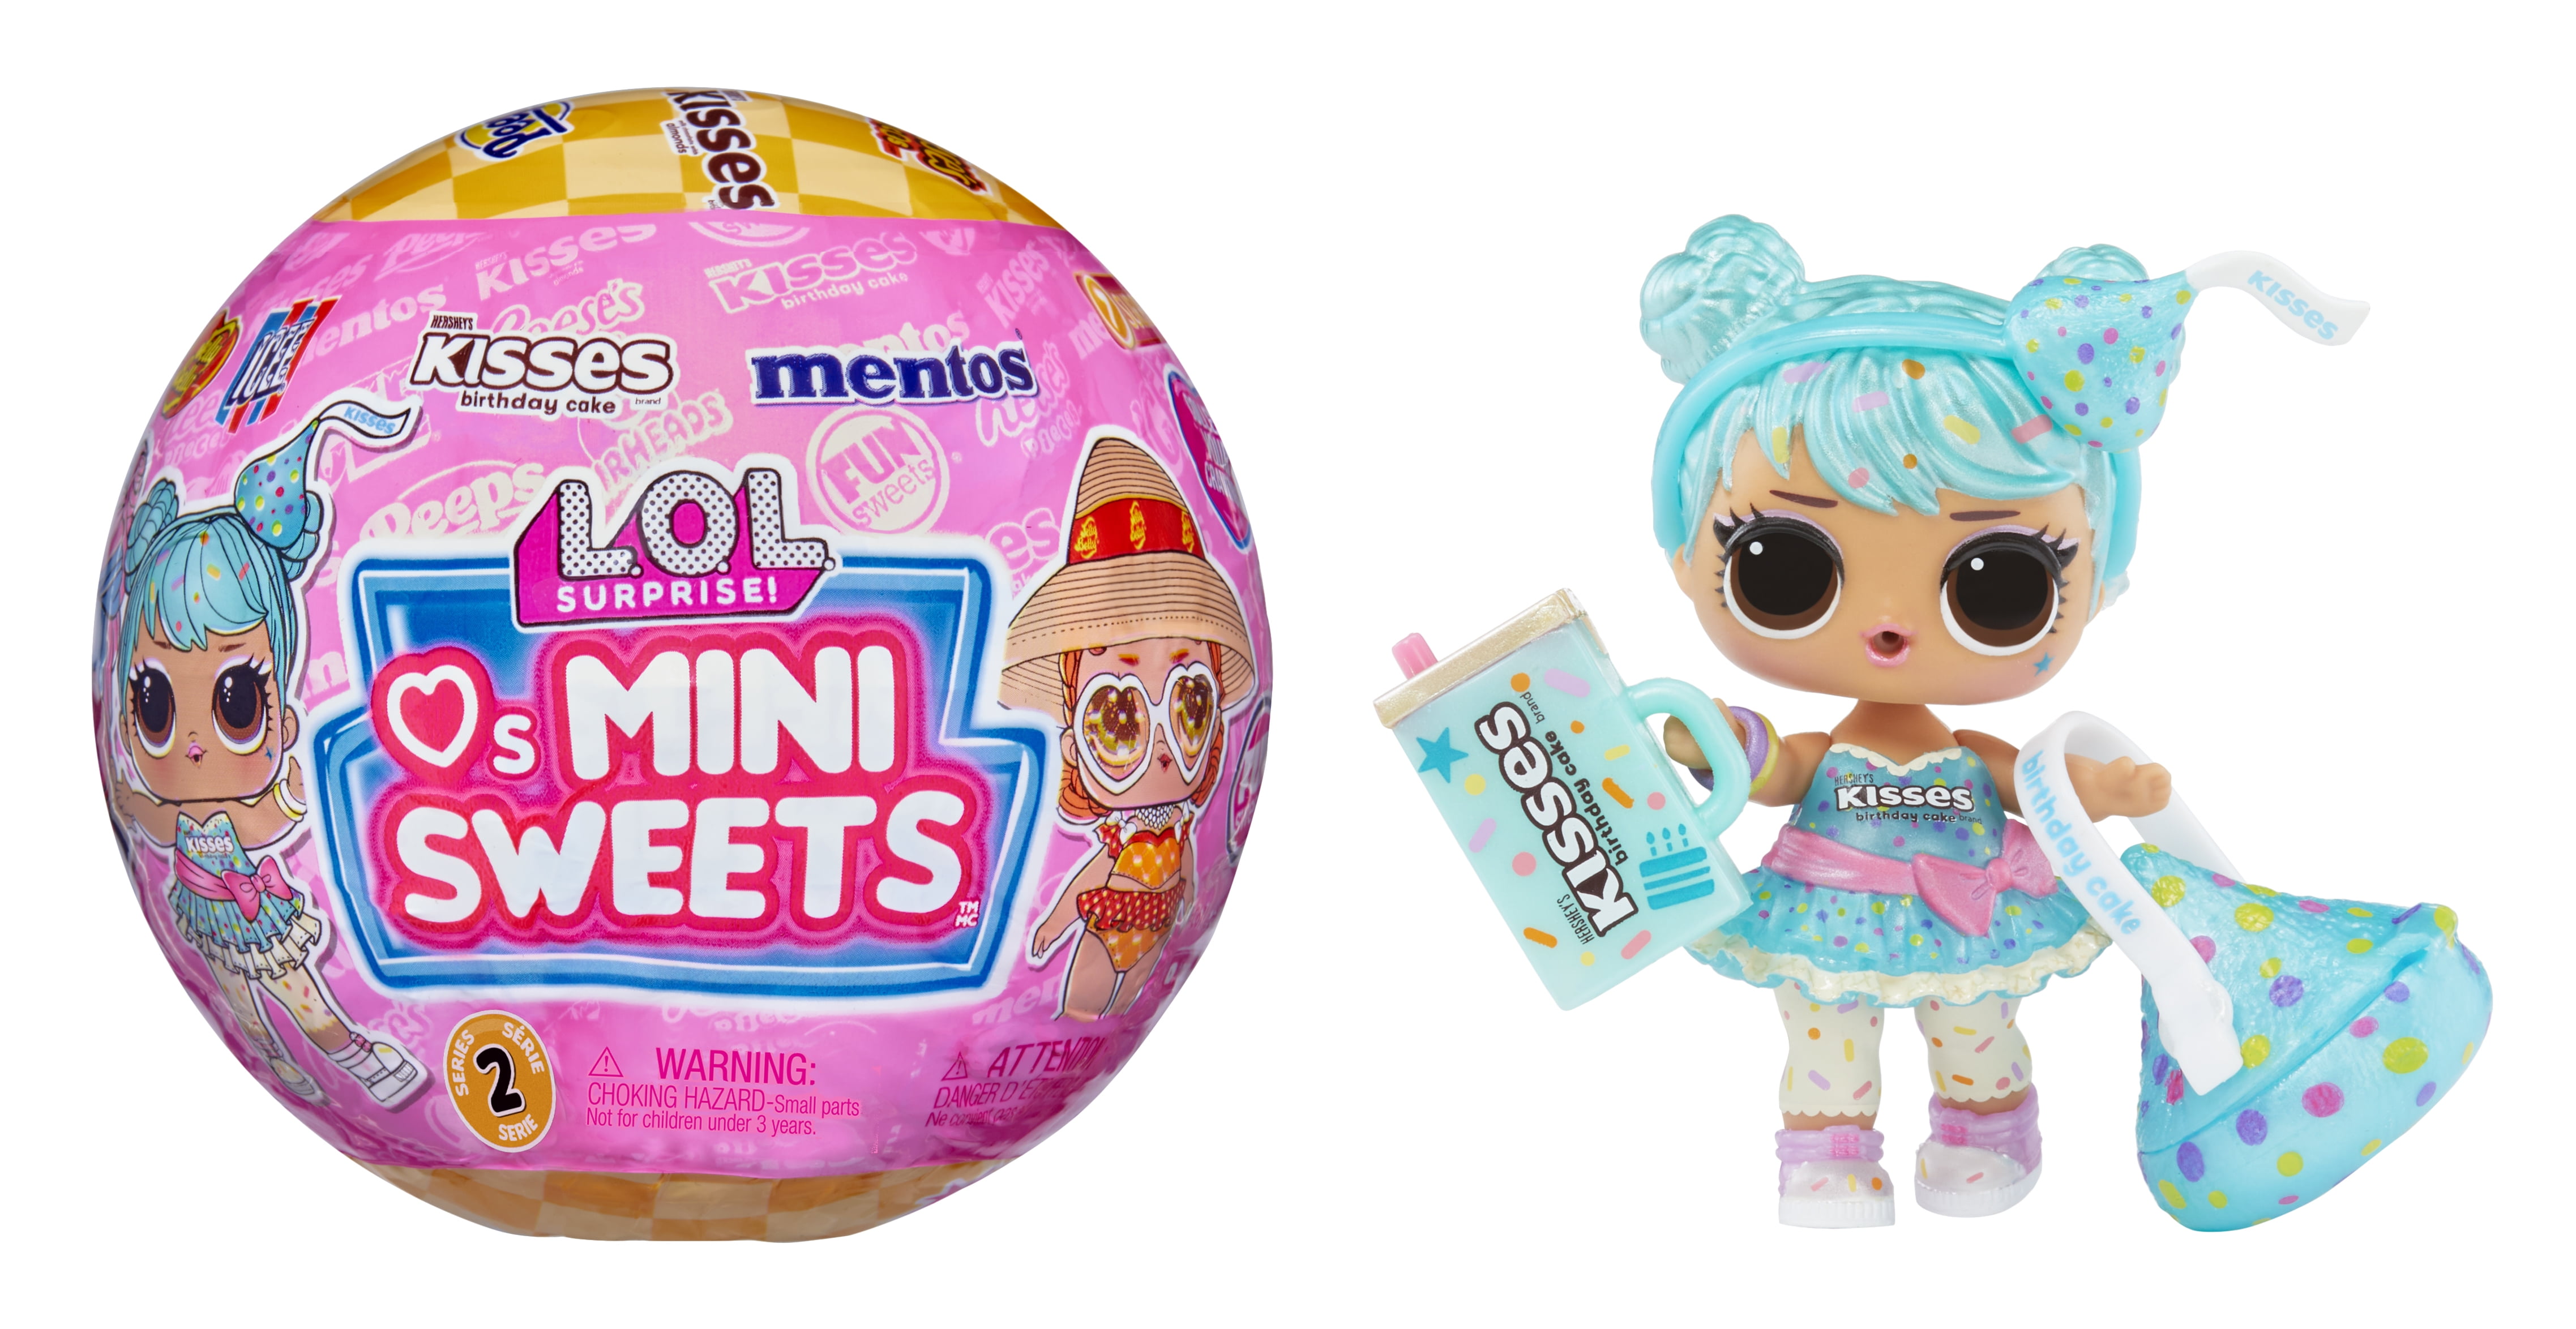 LOL Surprise Loves Mini Sweets Series 2 7 Surprises Accessories Limited Edition Doll Candy Theme Collectible Doll Great Gift Girls Age 4 3acdd281 5f16 4c57 a4cc 5cc5f74cc5c0.75a3b9819e8827e843a59371e87c7270